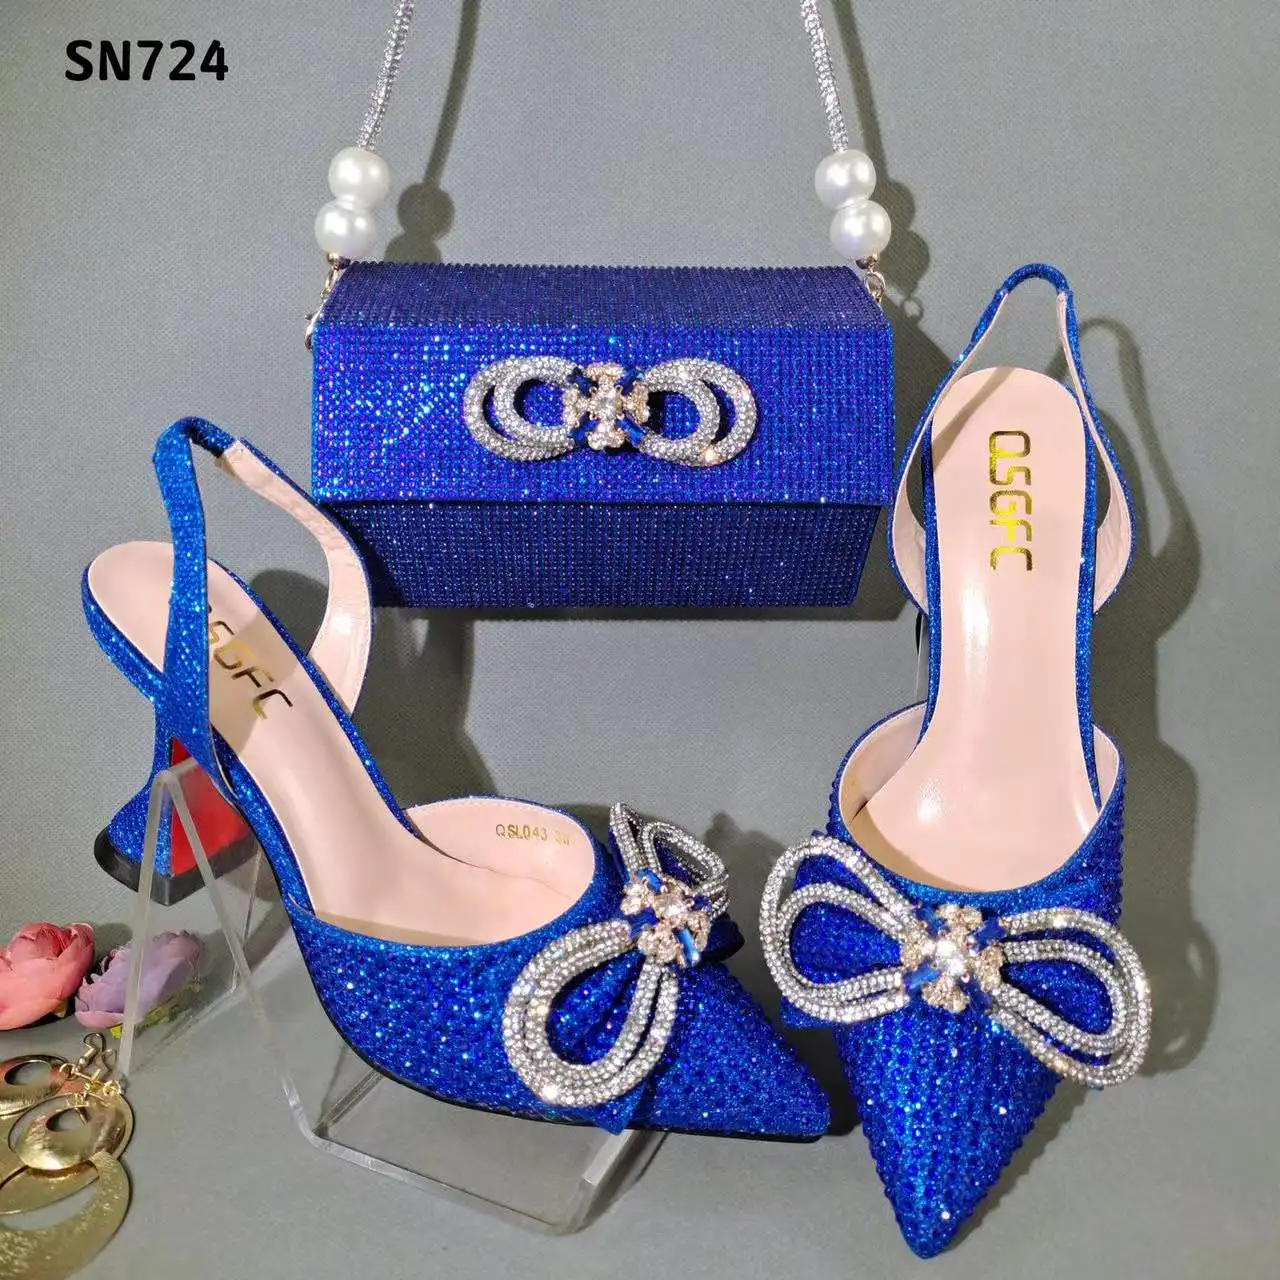 

High Heel Women Italian nigerian shoes and bag sets With Stones Beautiful Party shoes bag